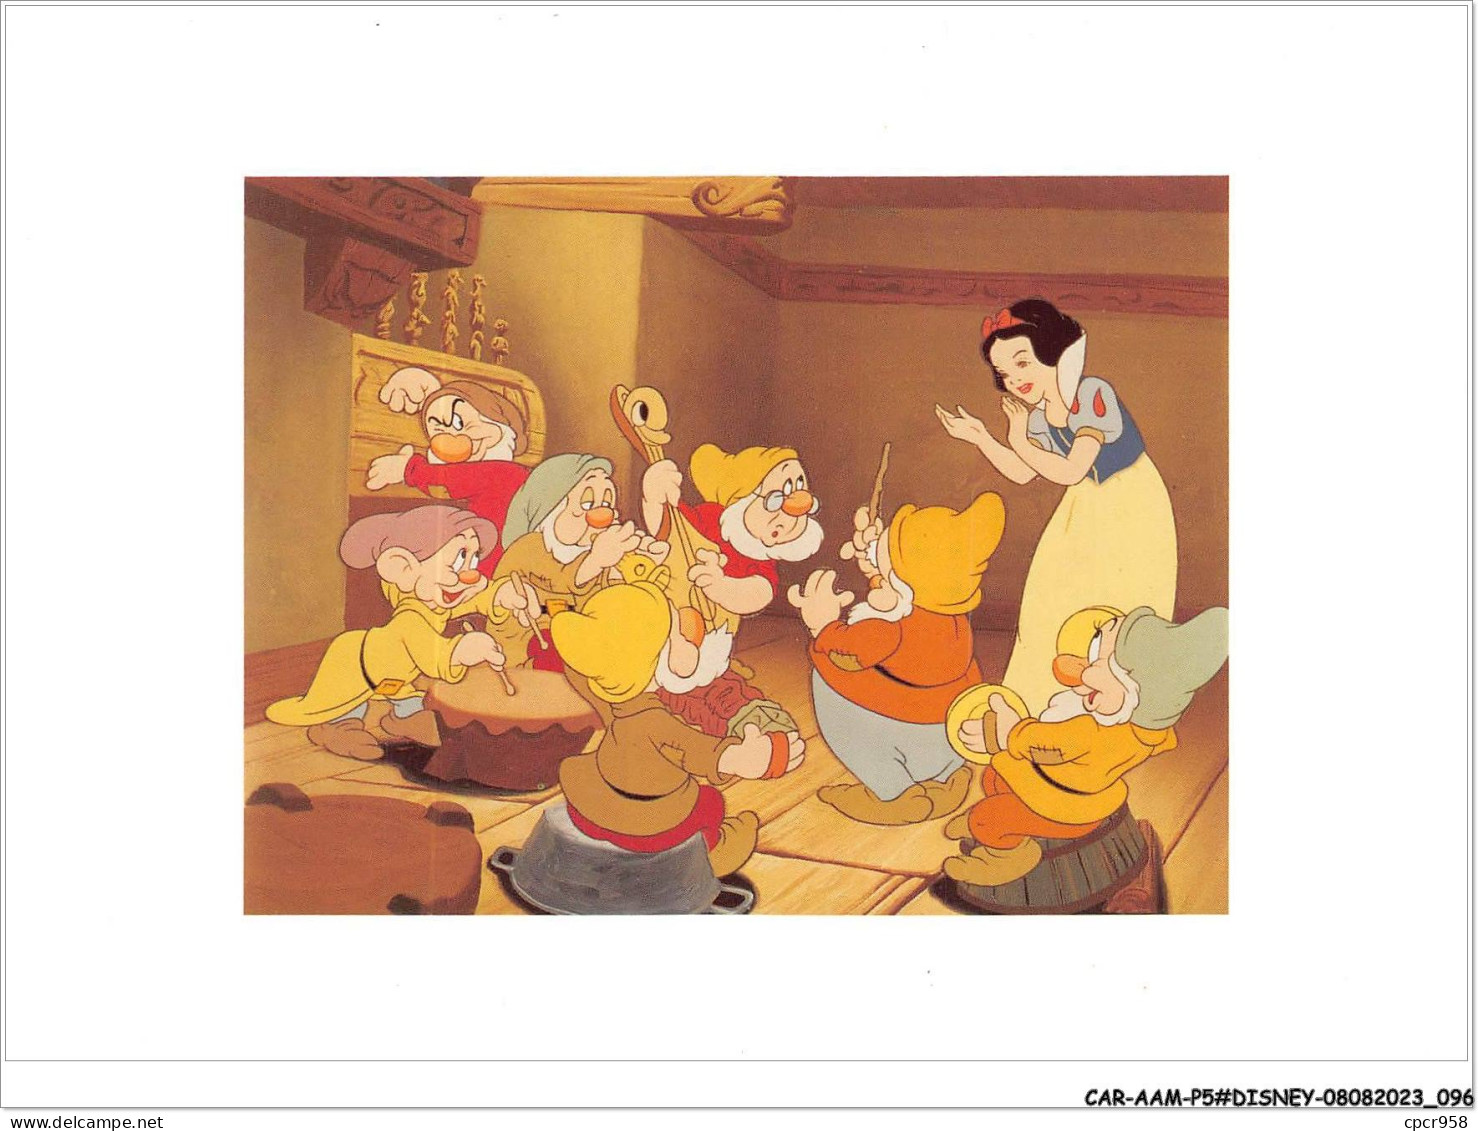 CAR-AAMP5-DISNEY-0456 - Blanche-Neige - Happy Leads The Orchestra - Snow White And The Seven Dwarfs  - Disneyland